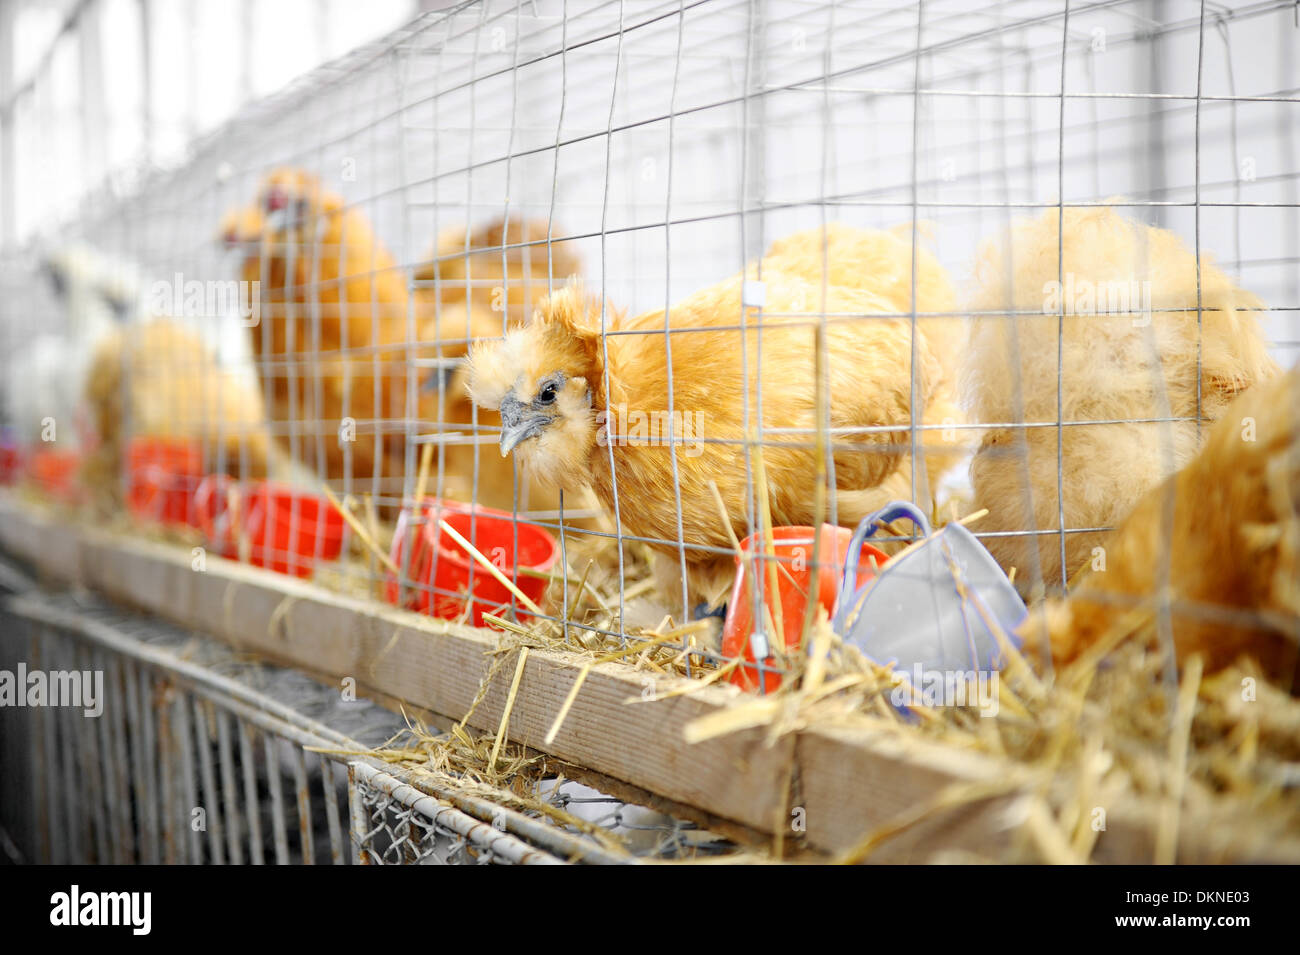 Japanese chicken in a cage at an agricultural fair Stock Photo